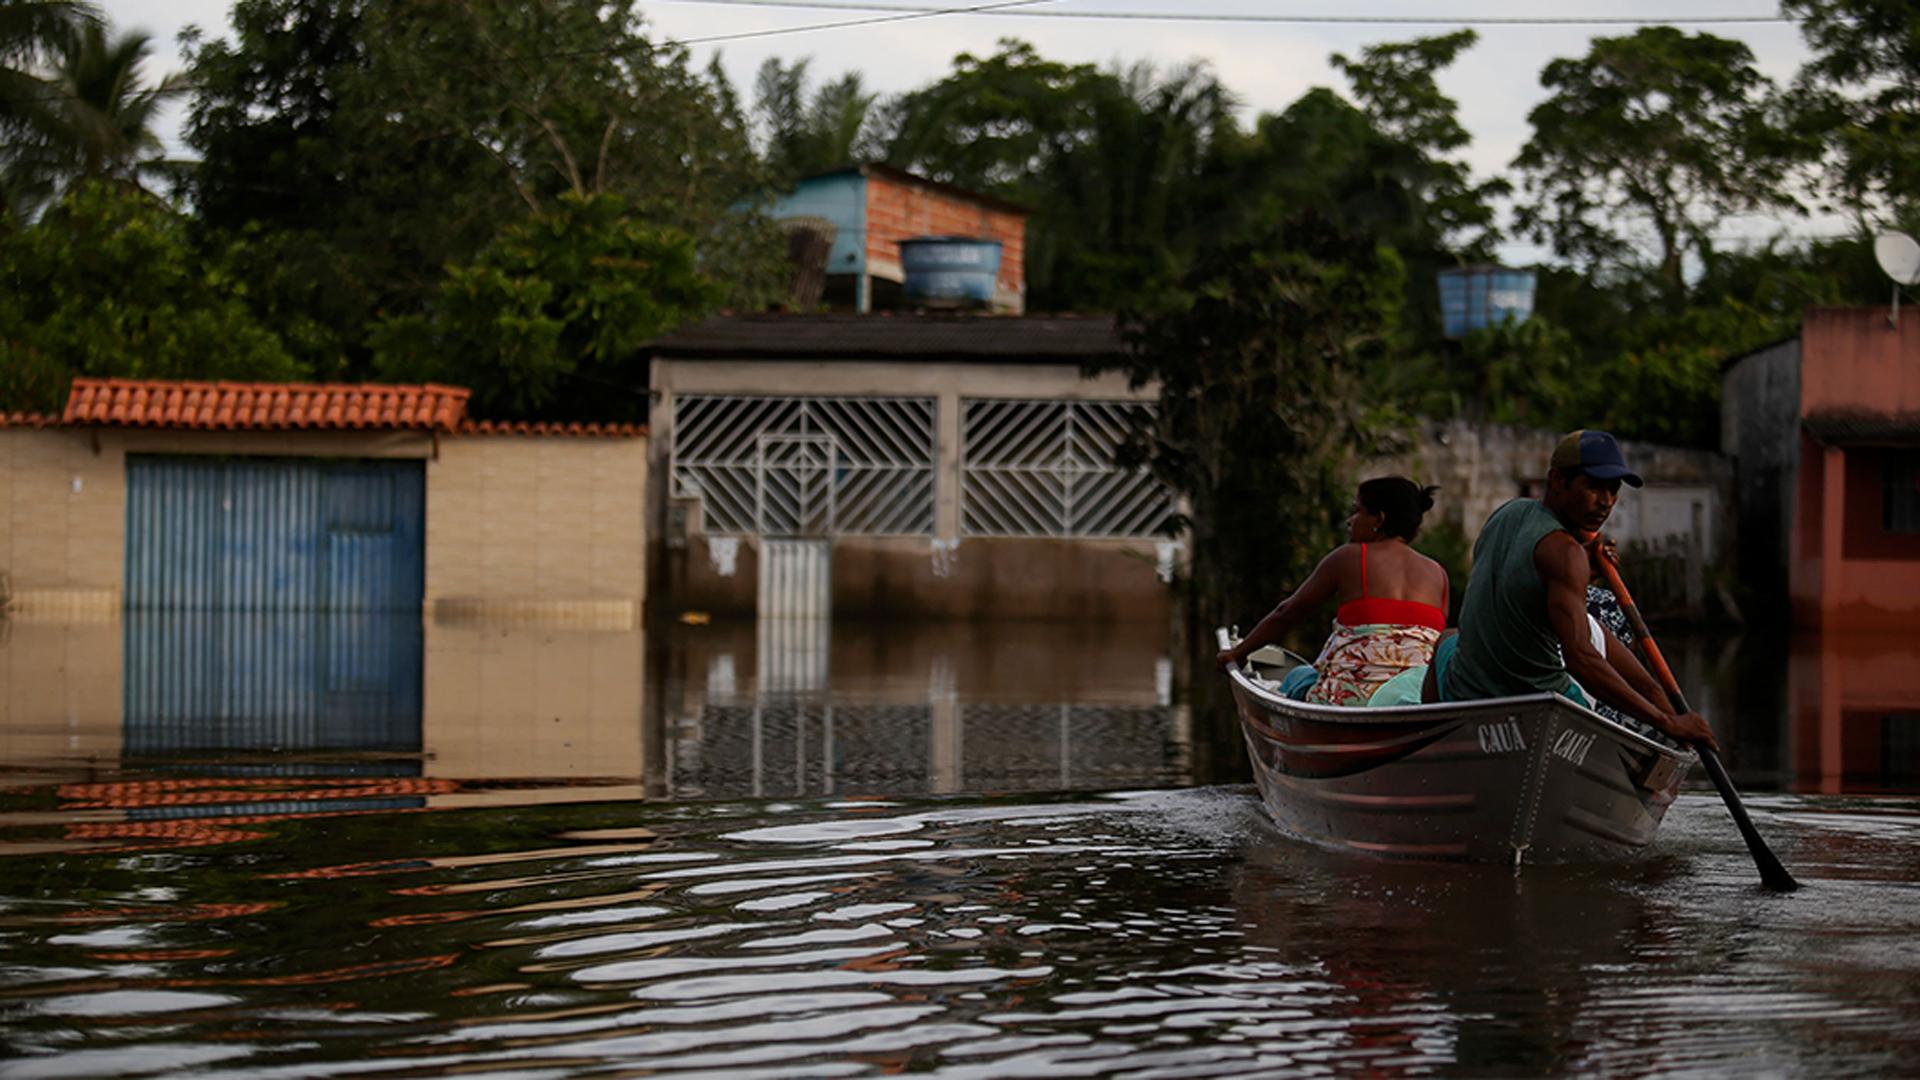 Luzia Barbosa de Oliveira, not pictured, is transported on a boat to her home partially submerged by flood waters in Sambaituba, a rural area of Ilheus, Bahia state, Brazil.